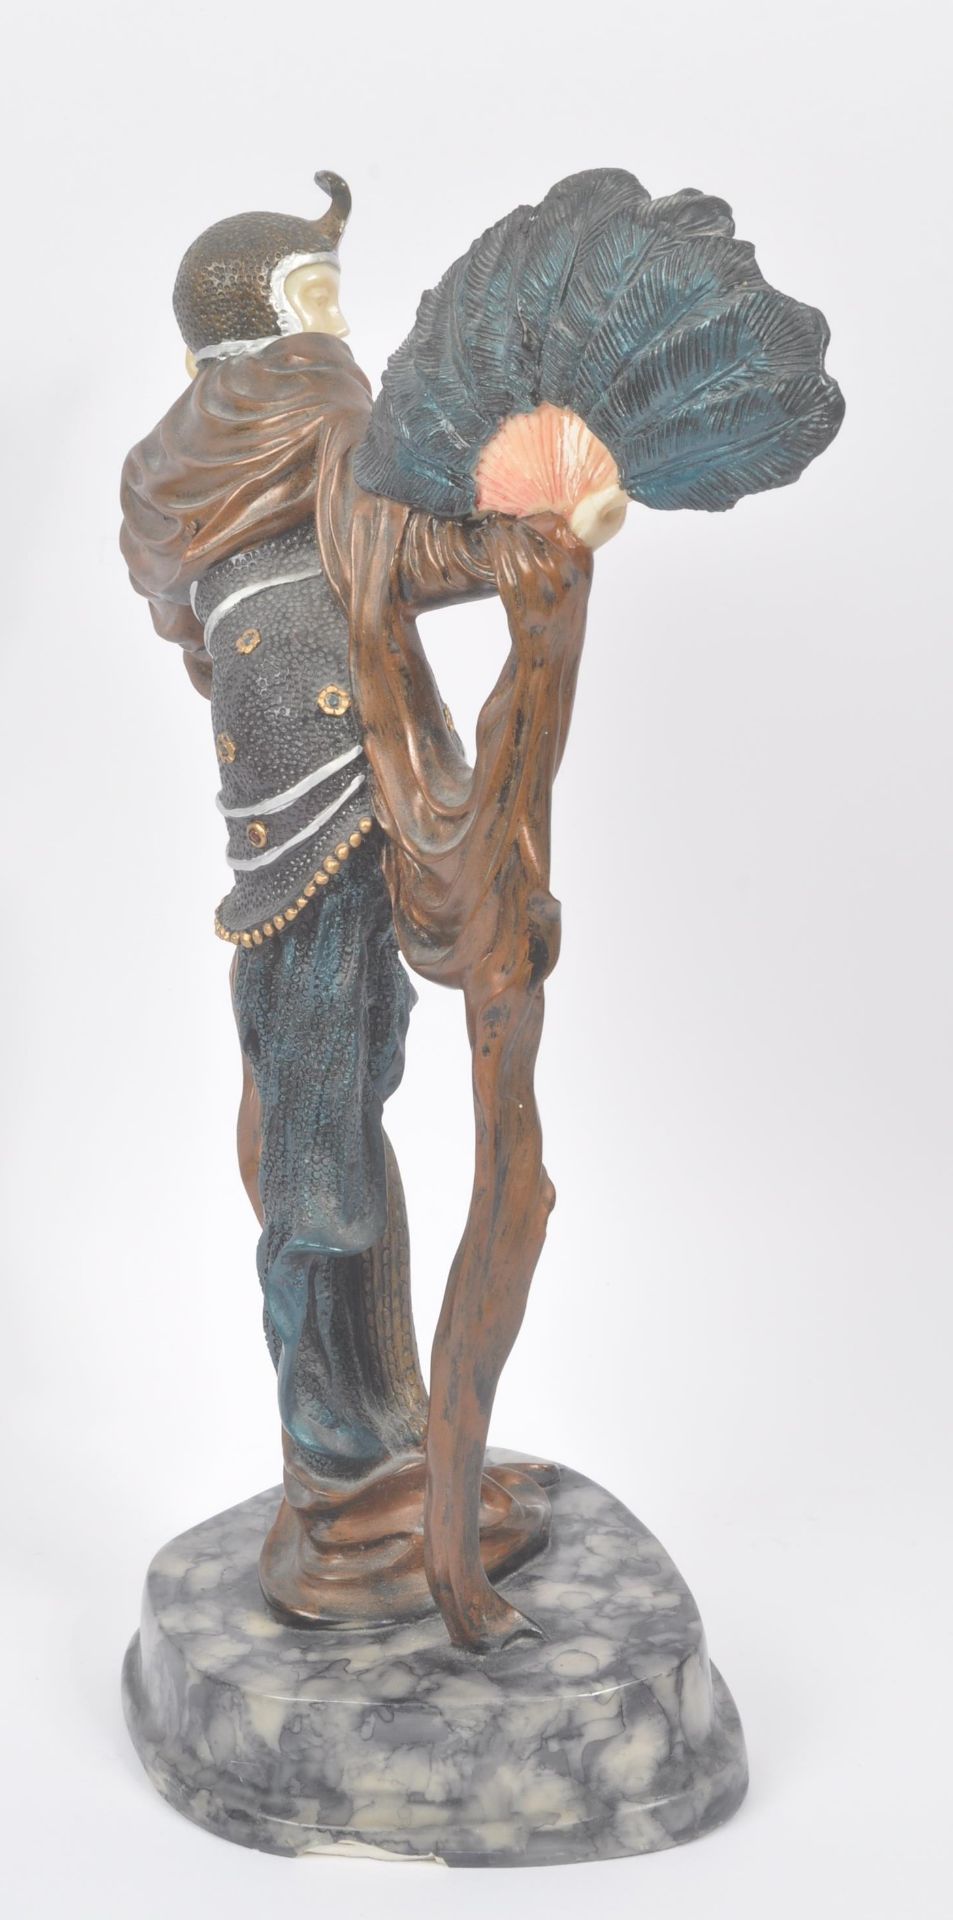 20TH CENTURY DECO STYLE RESIN DANCING FIGURINE - Image 3 of 5